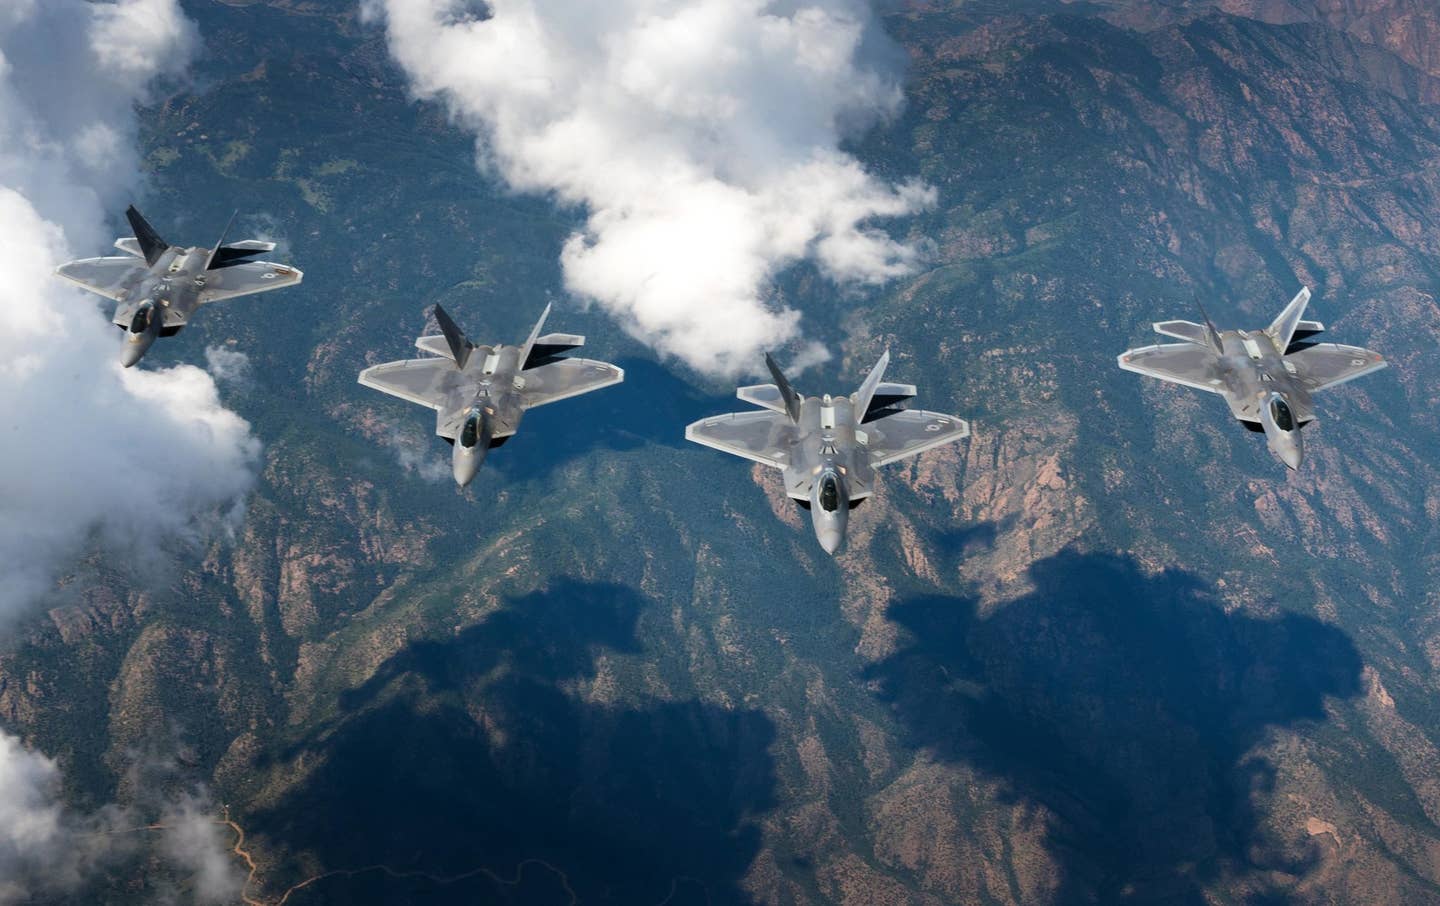 A four-ship formation of F-22 Raptors from the 94th Fighter Squadron and 1st Fighter Wing fly in formation over the Rocky Mountains in Colorado. The four aircraft were in transit back to Joint Base Langley-Eustis, Va. after participating in Red Flag 17-4 Aug. 26, 2017. (U.S. Air Force photo)